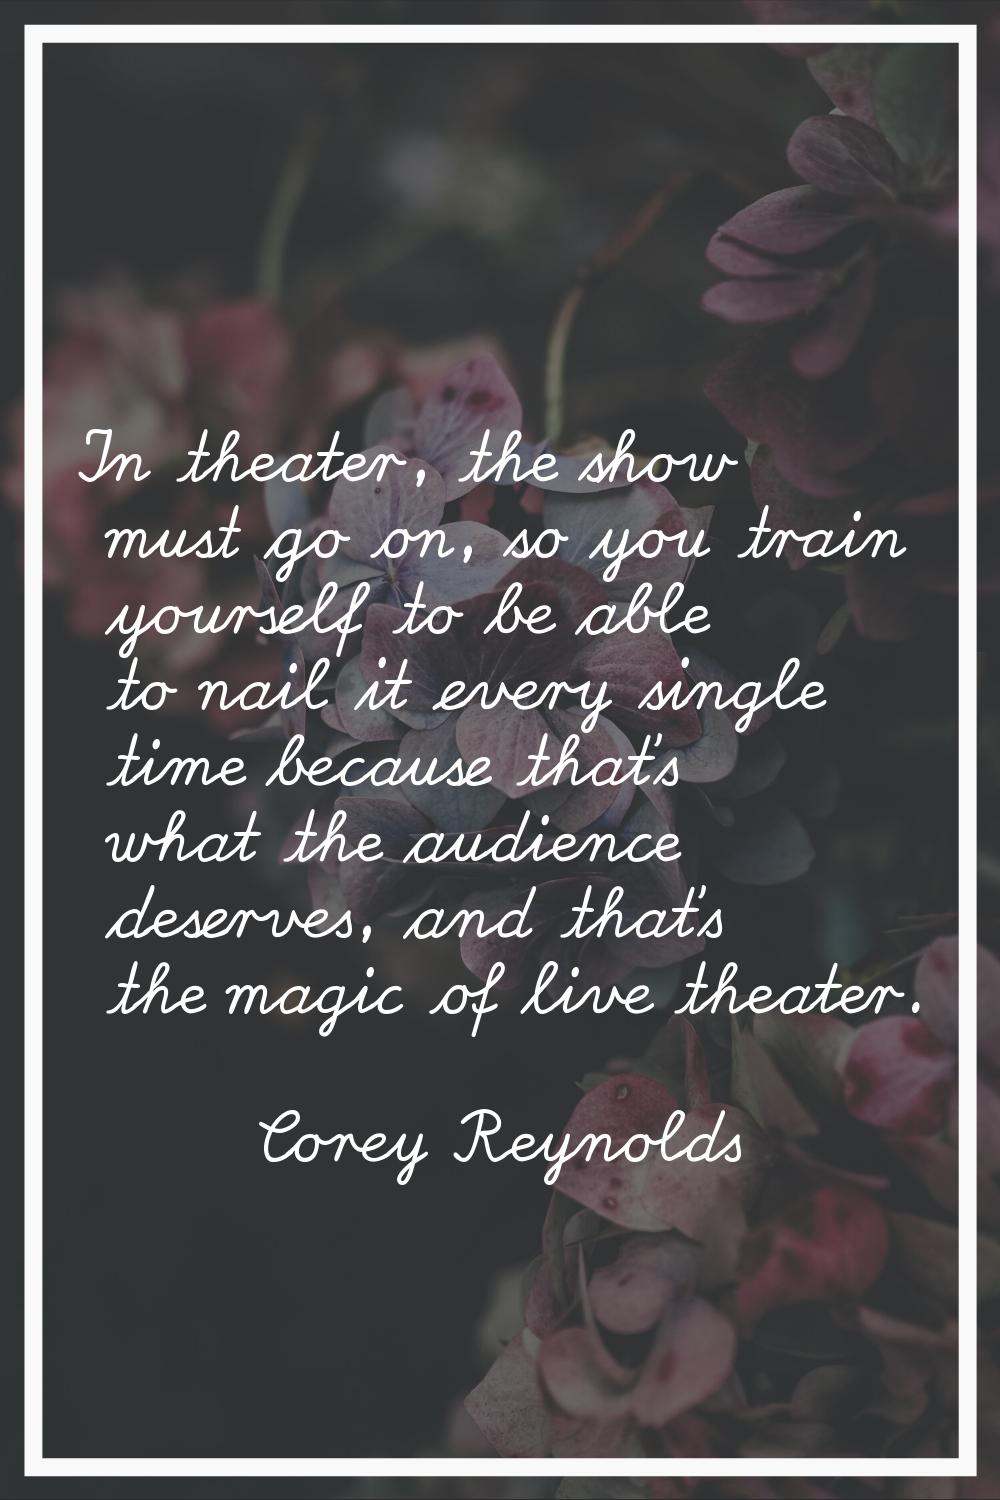 In theater, the show must go on, so you train yourself to be able to nail it every single time beca